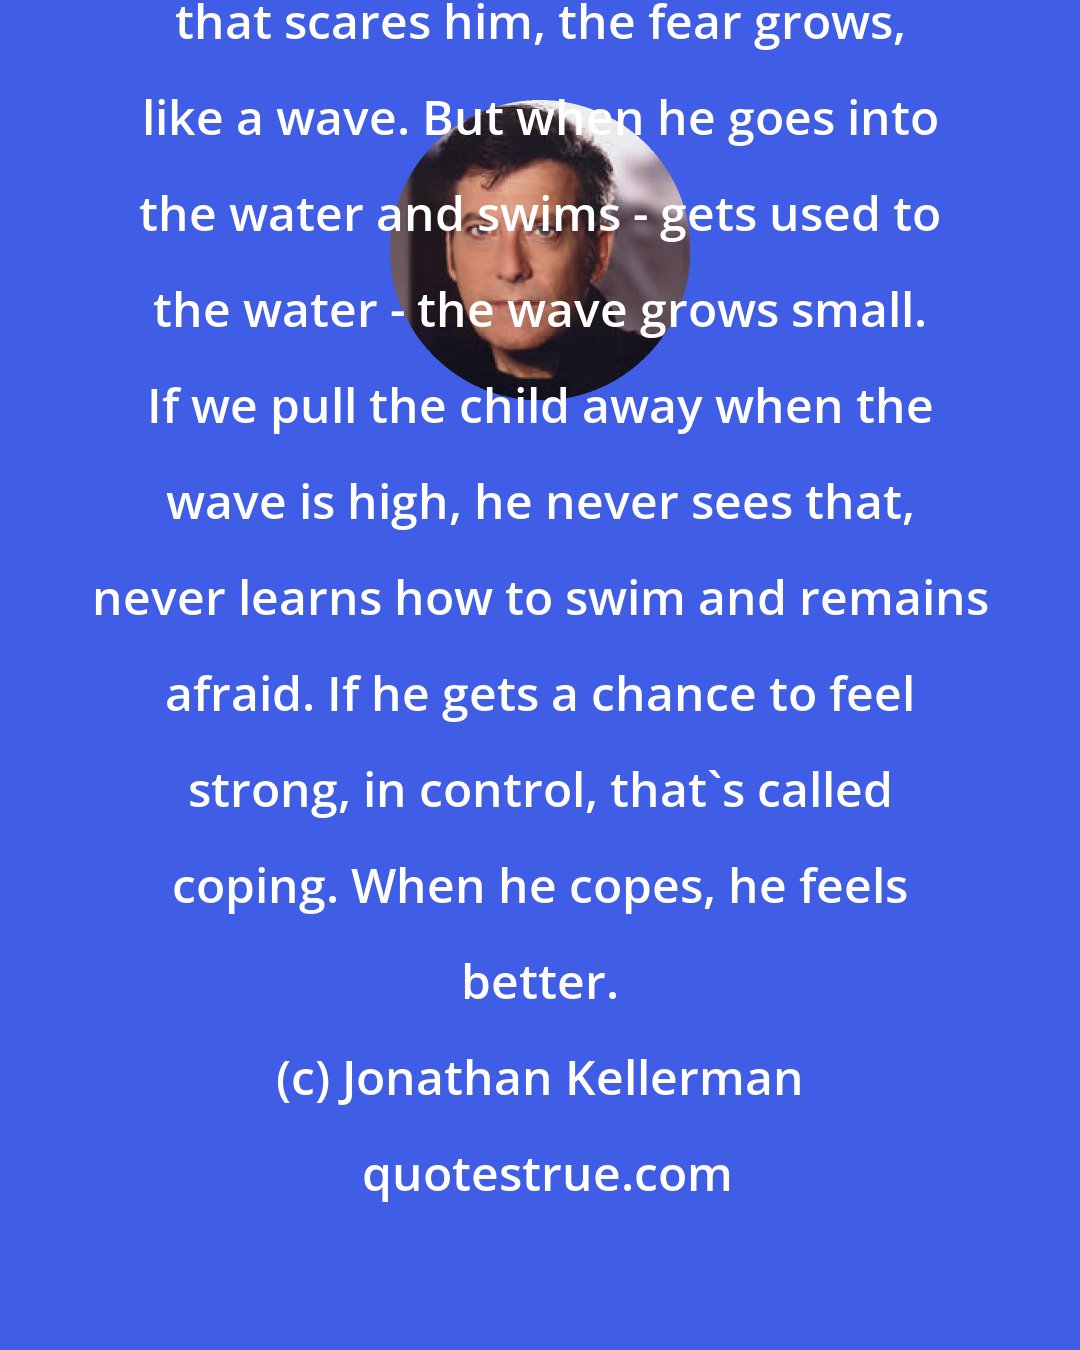 Jonathan Kellerman: At first, when a child meets something that scares him, the fear grows, like a wave. But when he goes into the water and swims - gets used to the water - the wave grows small. If we pull the child away when the wave is high, he never sees that, never learns how to swim and remains afraid. If he gets a chance to feel strong, in control, that's called coping. When he copes, he feels better.